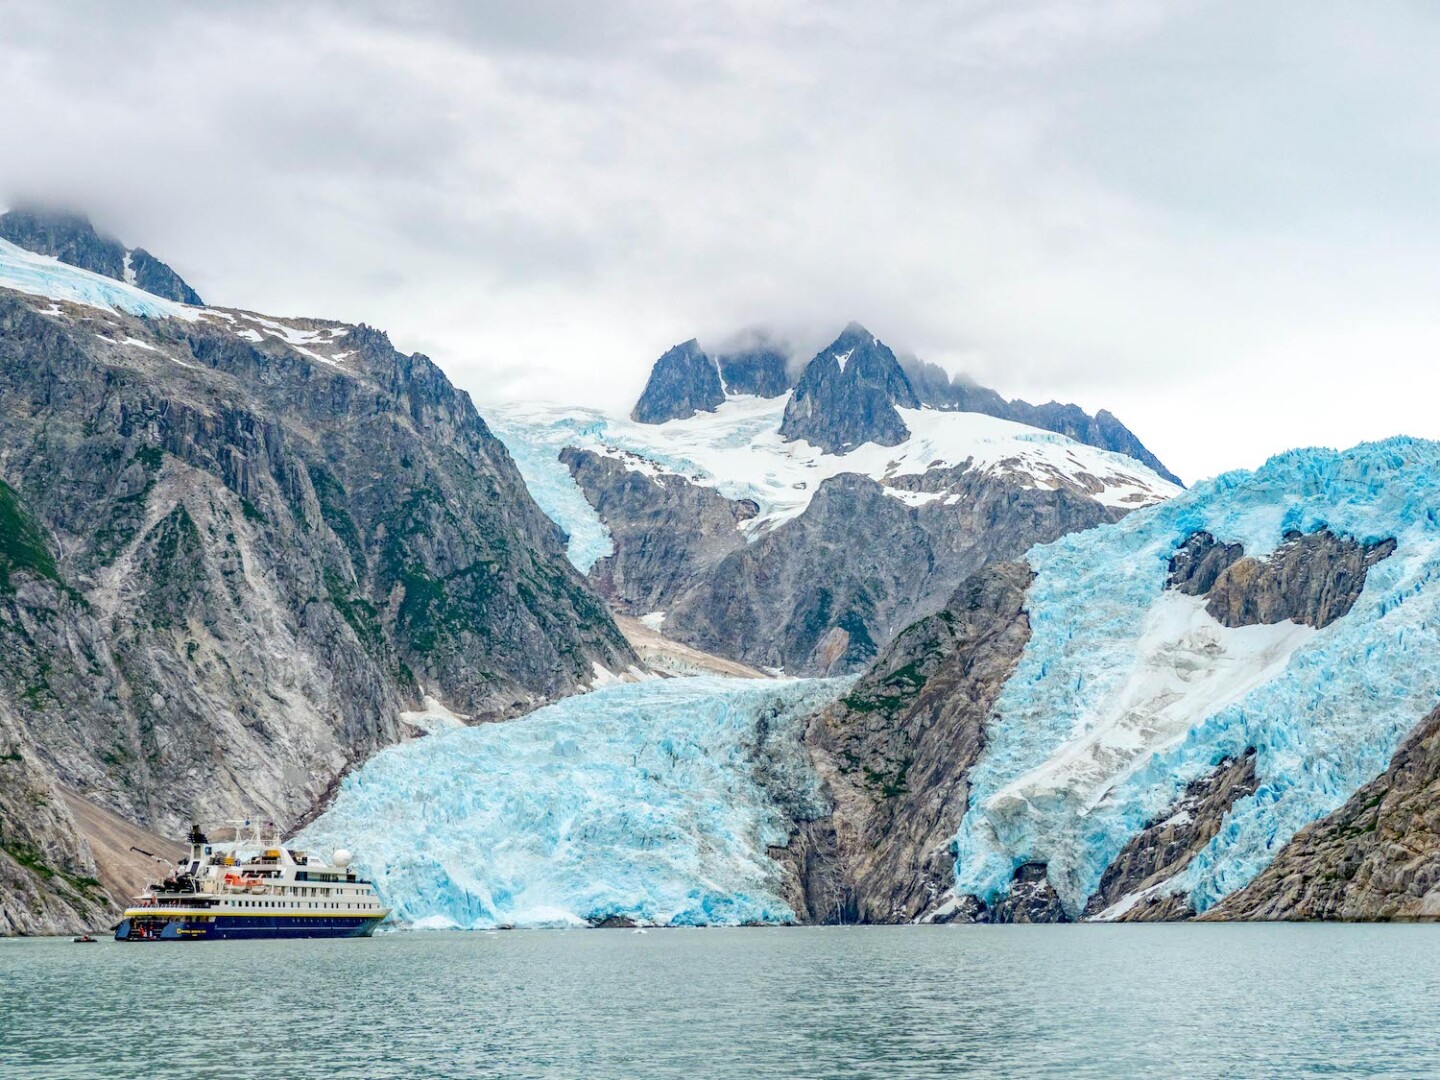 <h3>3. Lindblad Expeditions’ Exploring Alaska’s Coastal Wilderness</h3> <ul>   <li>Cost: From $6,286 per person</li>   <li>Days: 8 days</li>   <li>Departure port: Juneau, Alaska</li>   <li>End port: Sitka, Alaska (this same cruise is also offered in reverse)</li>   <li><a class="Link" href="https://fave.co/3zEtjAF" rel="noopener nofollow sponsored">Book now</a></li>  </ul> <p>Many of the sailings to Alaska center on the state’s major ports of call, like Juneau and Sitka. There’s nothing wrong with those itineraries, but they do tend to focus more on touristy downtowns and less on the great outdoors. </p> <p>While this <a class="Link" href="https://fave.co/2N8oZ5X" rel="noopener nofollow sponsored">Lindblad</a> sailing does start and end in those cities (since most Alaska cruise passengers fly to the state to begin their sailing journey, it’s most convenient to embark in a large port near a major airport before heading to more remote destinations), the days in-between are adventure packed. Multiple times a day, guests are invited to disembark for a closer look at the true wilds of Alaska. That could entail going kayaking among bobbing bits of glacial ice in Tracy Arm-Fords Terror Wilderness, or going for a Zodiac ride in Frederick Sound to view whales up close. Another option includes trekking on lesser-known forest trails and getting an explainer on tide pools along smaller islands. While Lindblad has a general idea of where the vessel will stop each day, itineraries are not set in stone and the crew is not afraid to mix it up if it means having a locale to themselves or if there’s a stellar animal encounter to enjoy—this is an expedition ship, after all.</p> <p>Because Lindblad Expeditions partners with National Geographic, there’s always a professional photographer onboard to help travelers best capture their trip, as well as naturalists and expert guides to put what passengers see on the voyage into a more informative context. Both the <i>National Geographic Quest</i> and <i>National Geographic Venture</i> make the sailing. The sister ships were purpose built to sail the North American coast and feature 50 rooms each, all with windows or portholes, private bathrooms, climate controls, and a TV, plus Wi-Fi connection. </p>